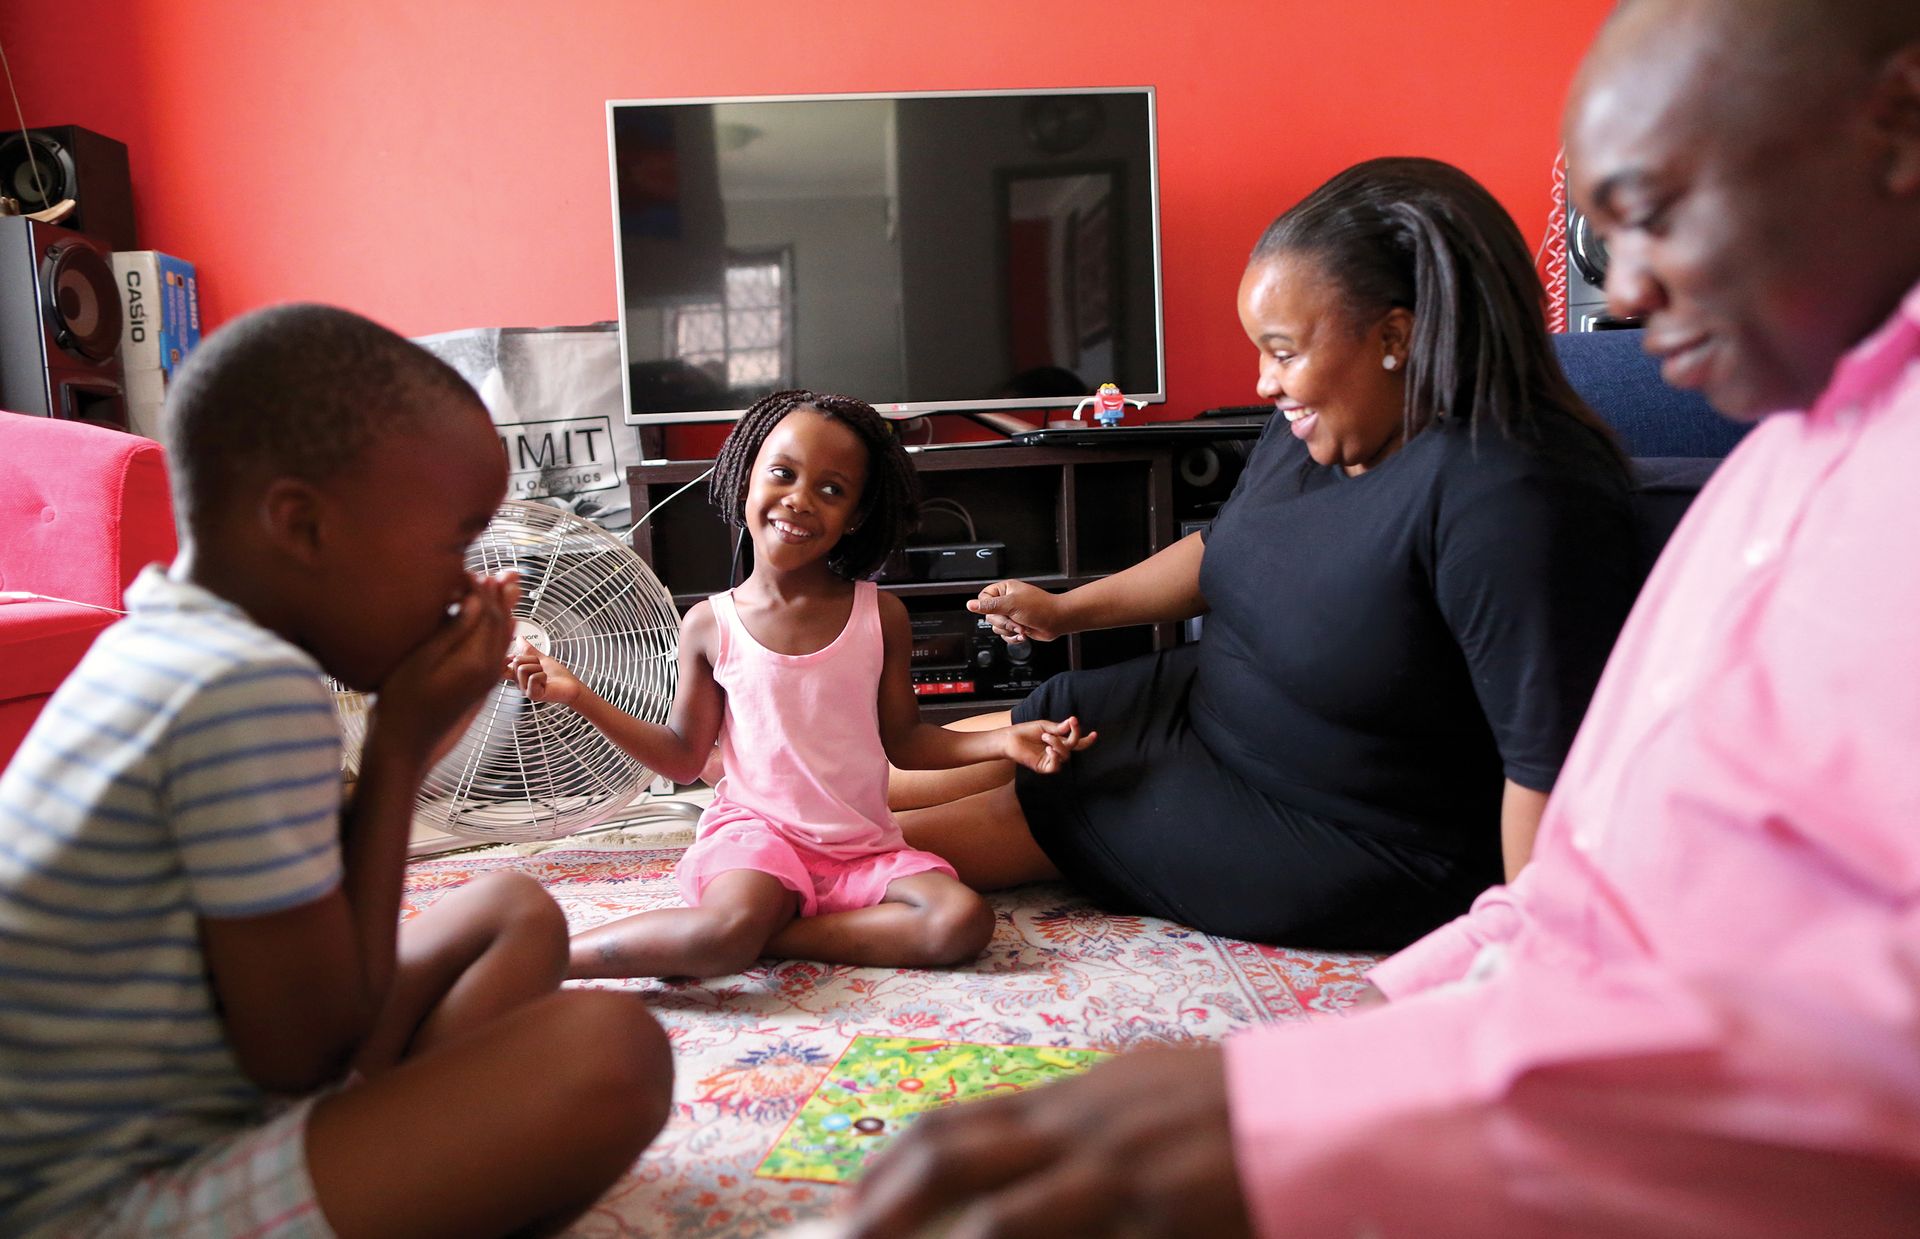 The Jiri family of Cape Town, South Africa, loves to spend time together. Parents Taona (right) and Amanda (center right) play games and share the gospel with their children, Tariro (center left) and Tendai (left).